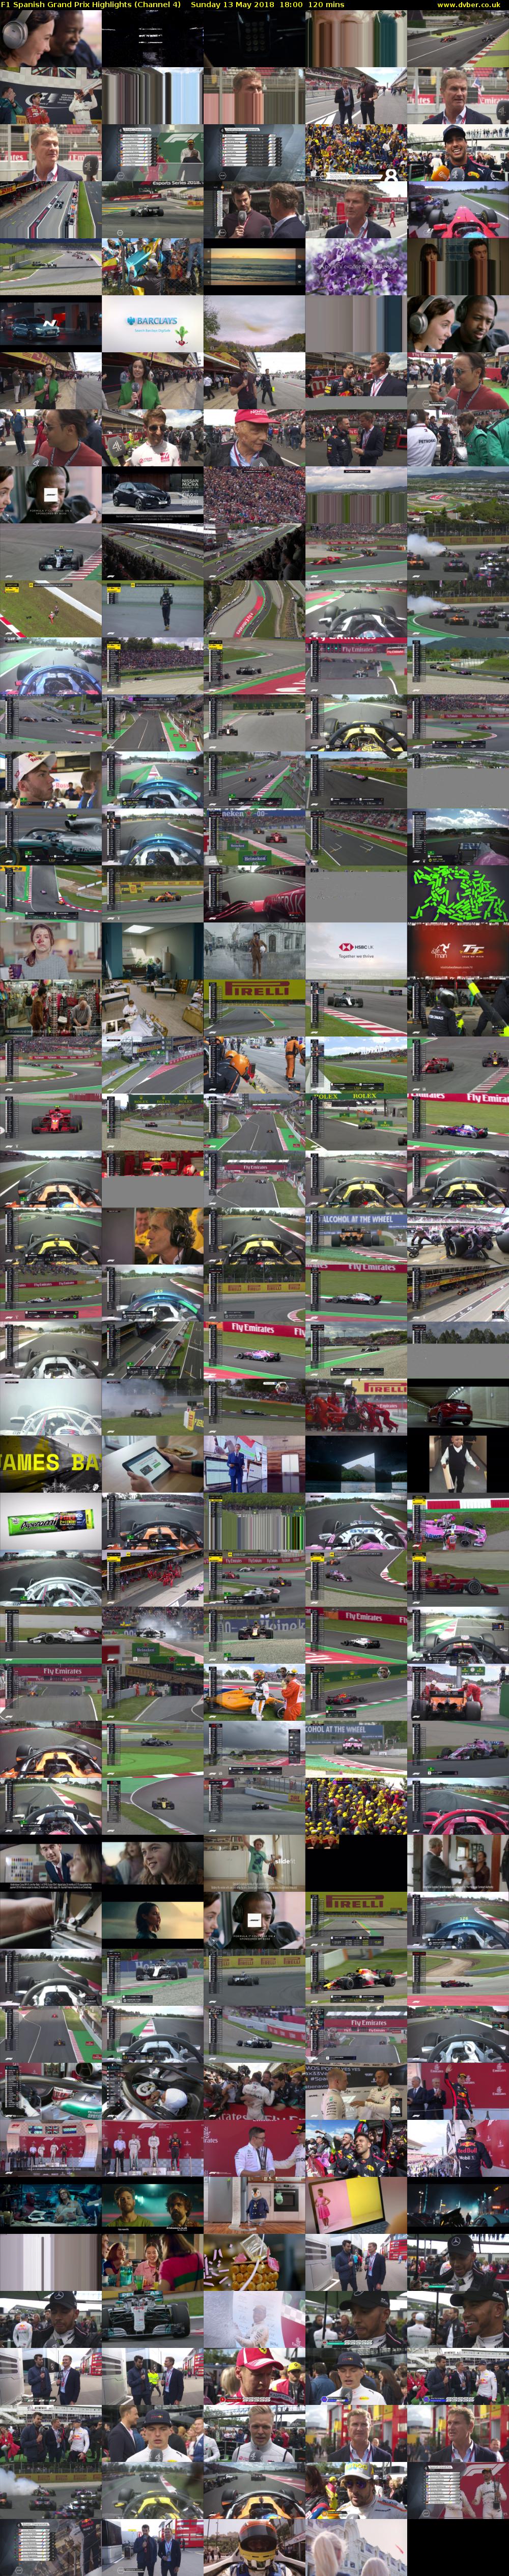 F1 Spanish Grand Prix Highlights (Channel 4) Sunday 13 May 2018 18:00 - 20:00